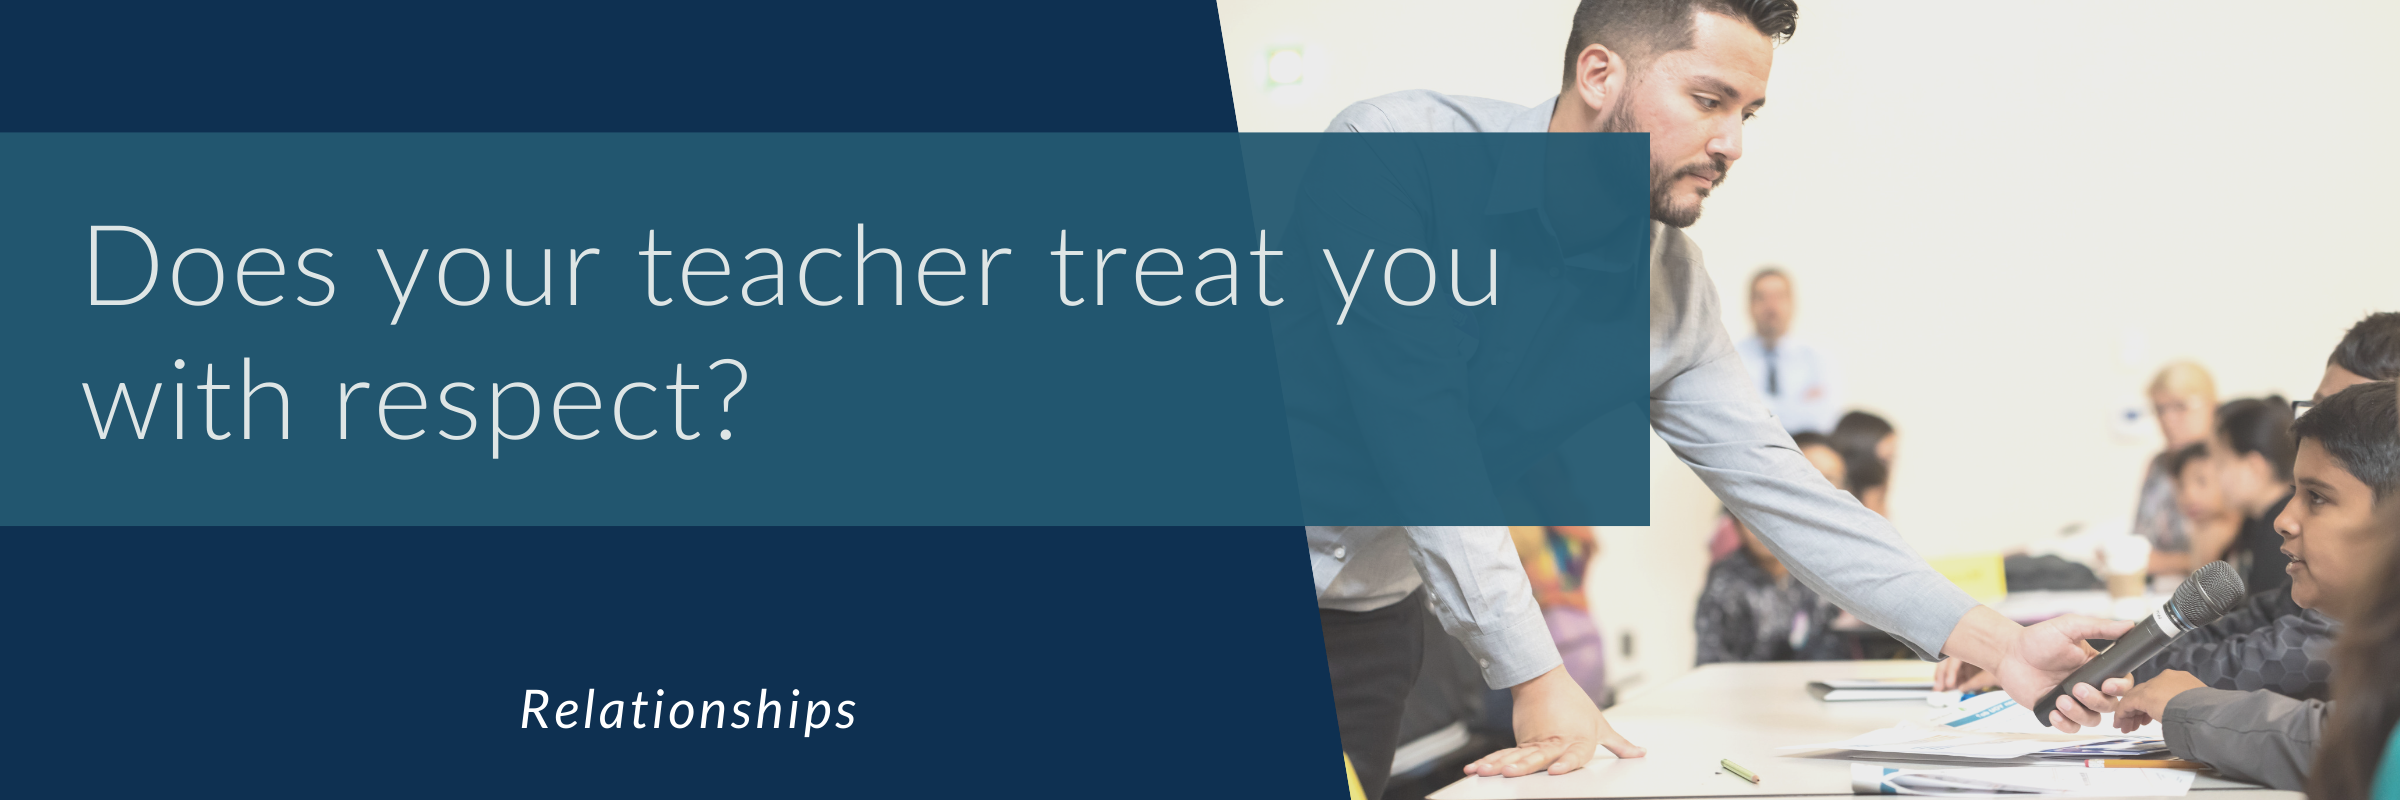 Does your teacher treat you with respect?